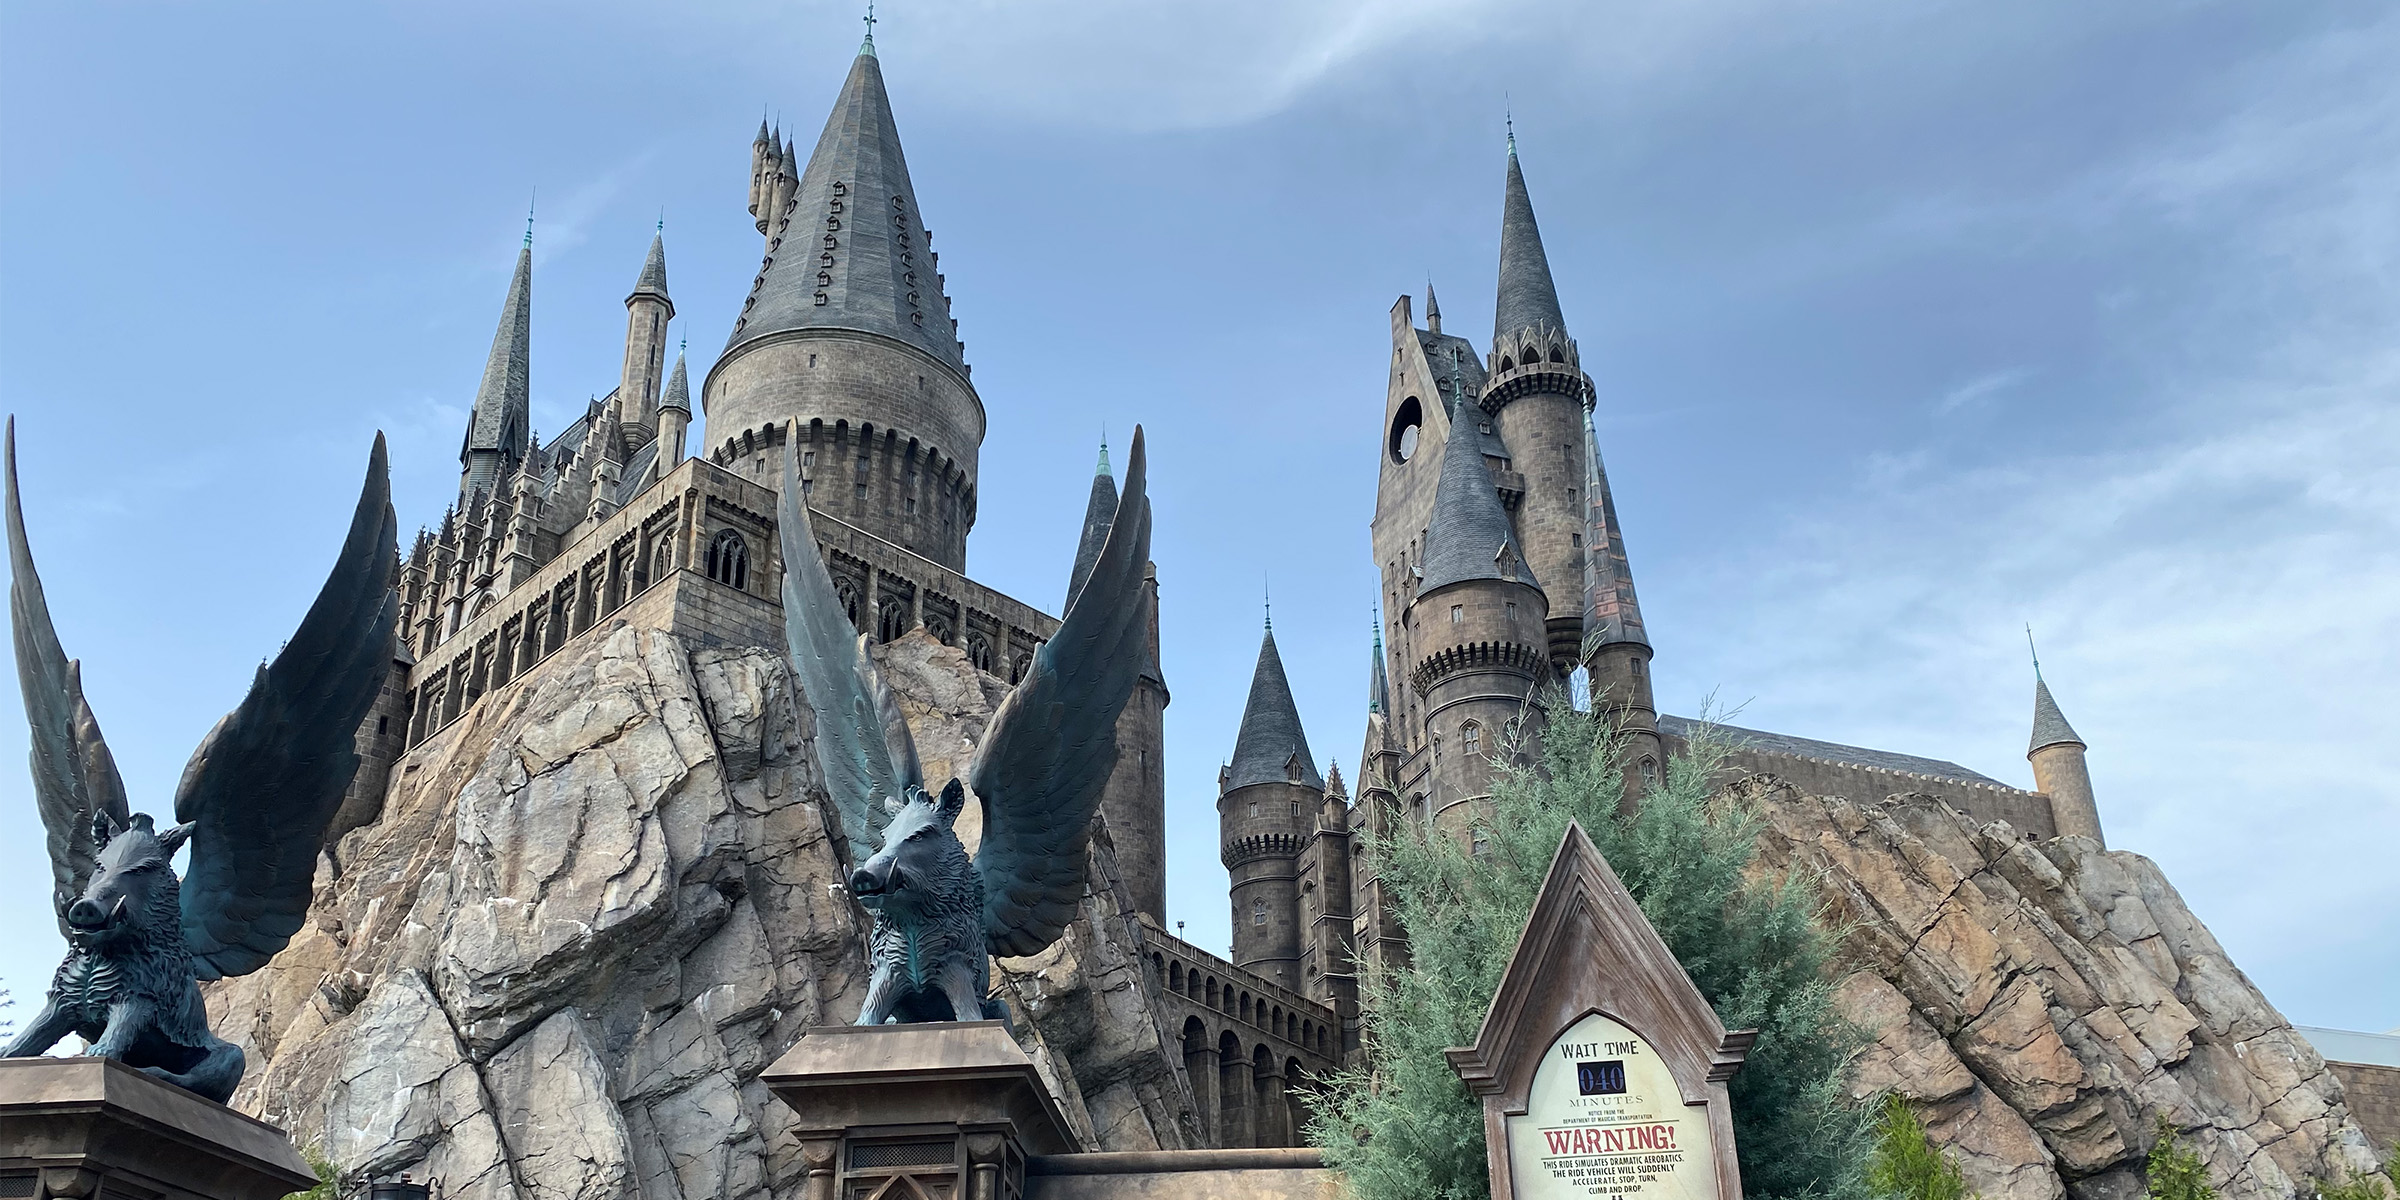 Harry Potter and the Forbidden Journey ride seats modified to fit